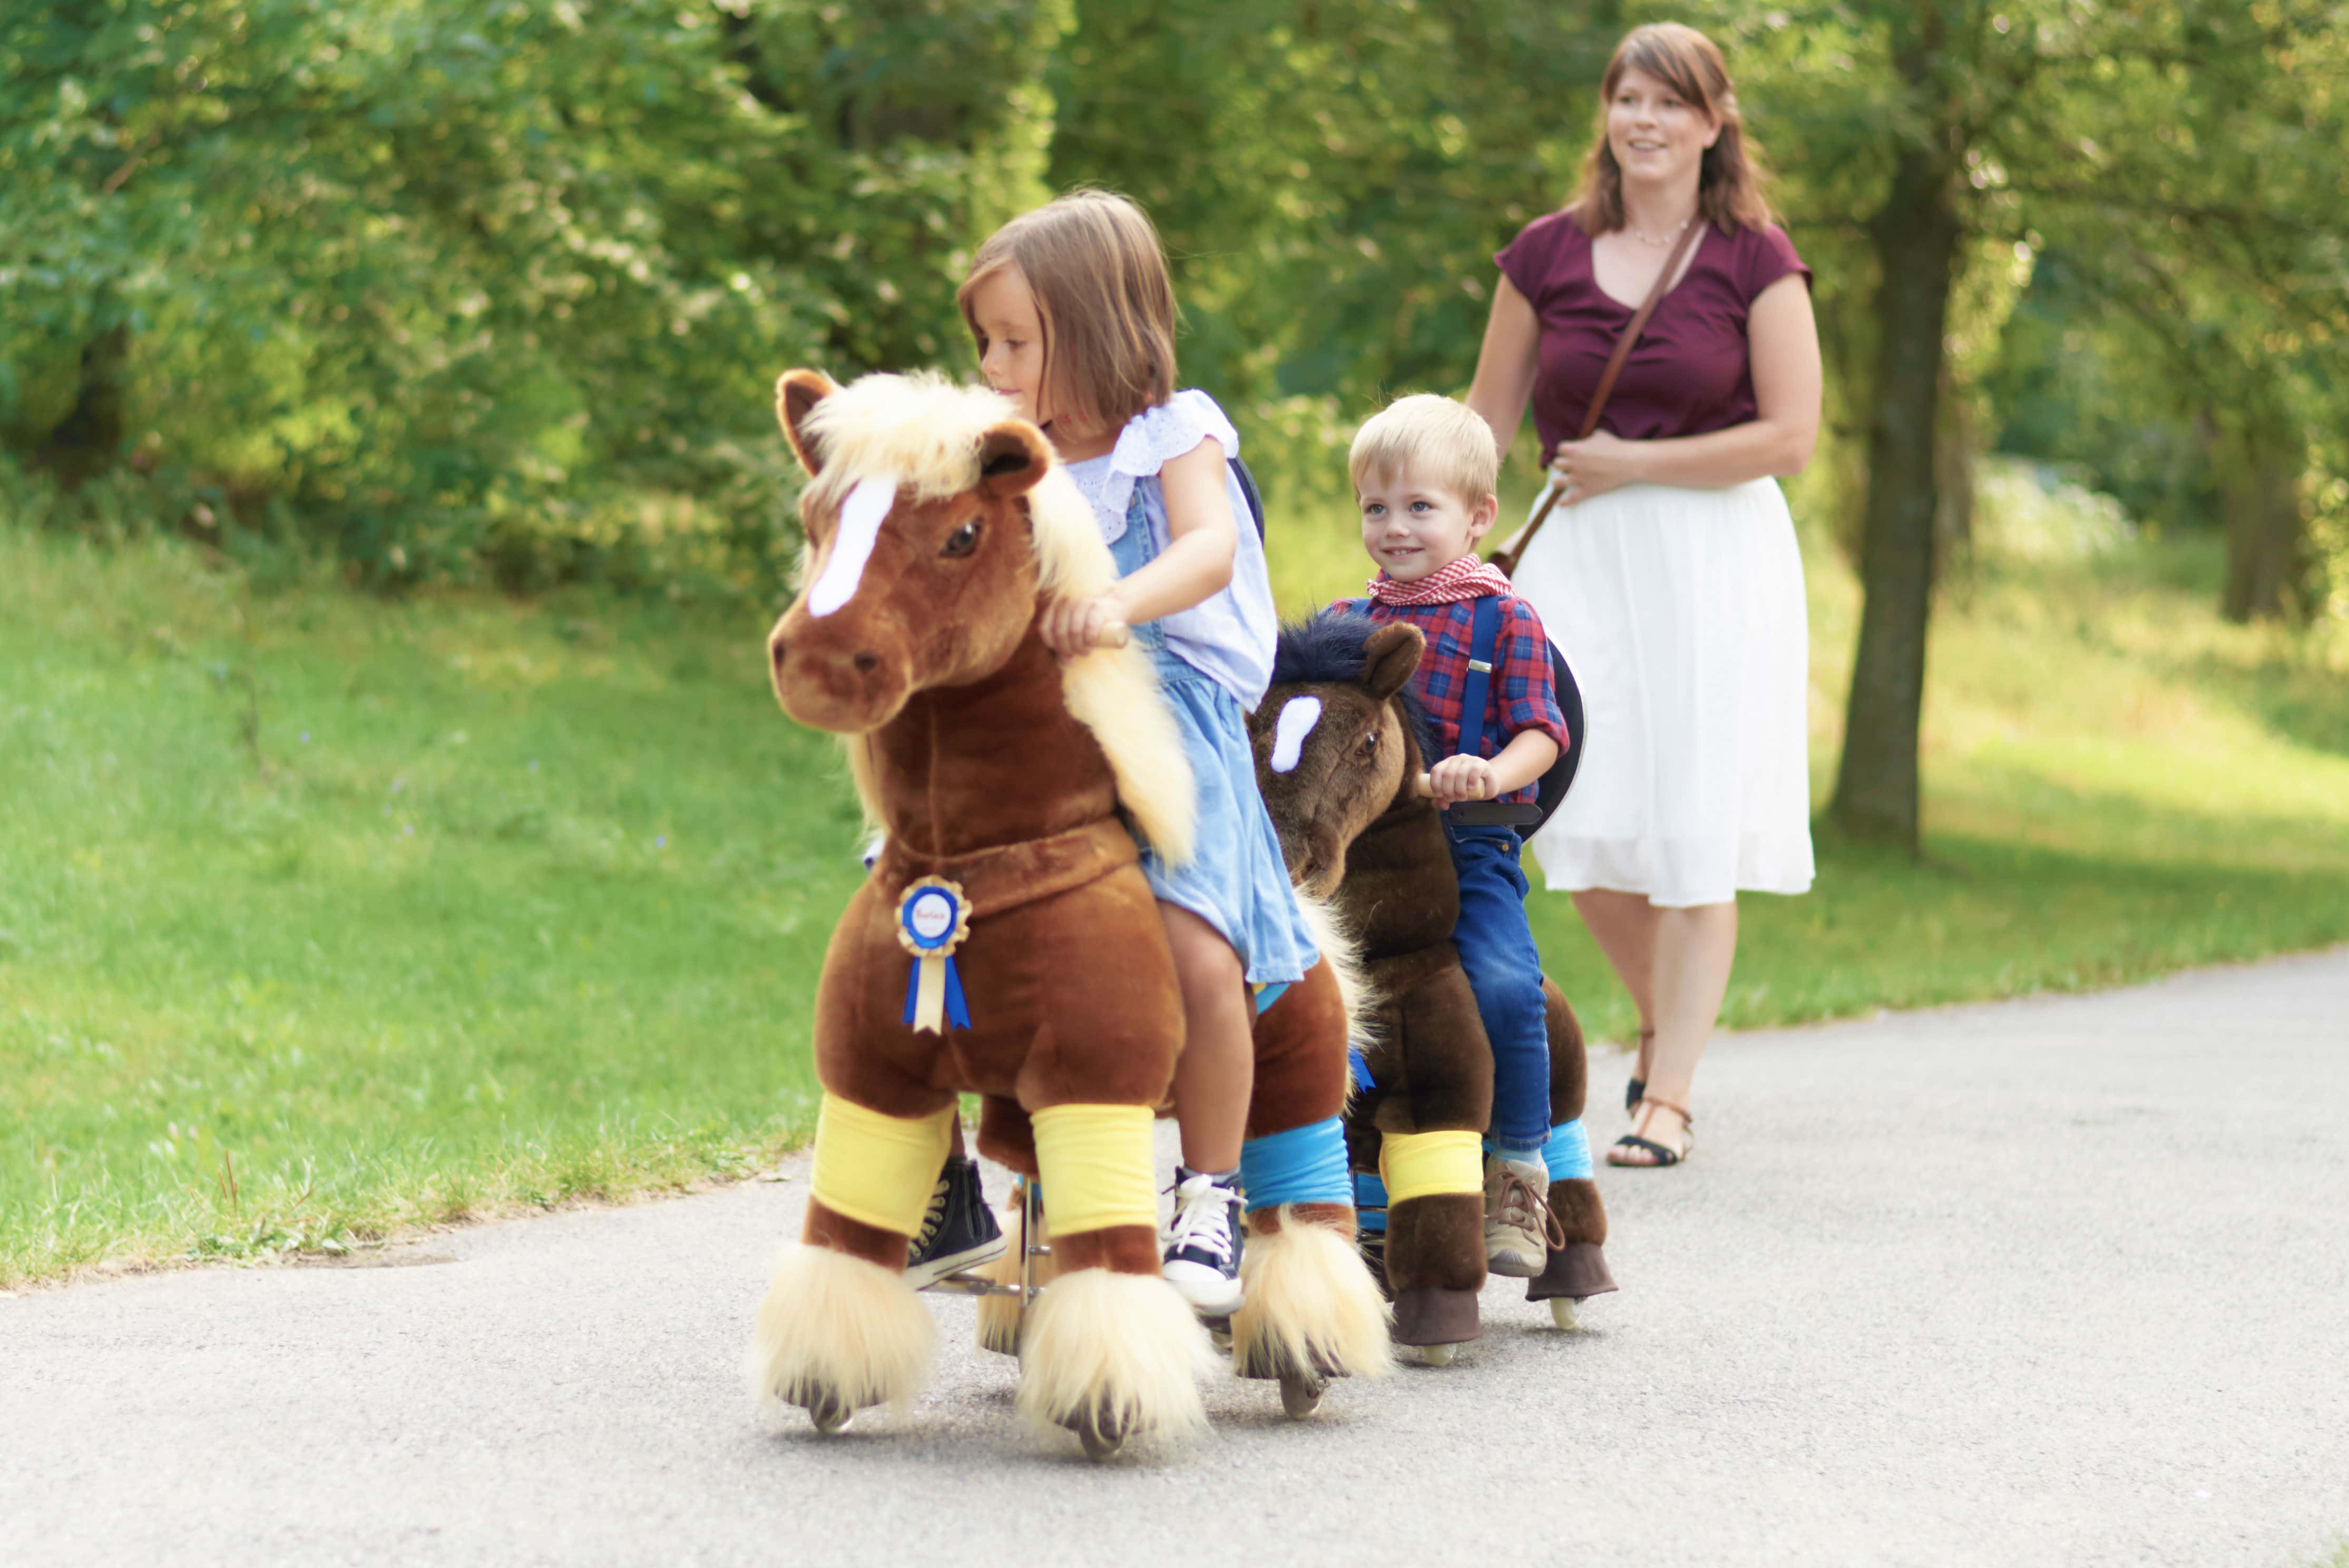 ride on pony with wheels